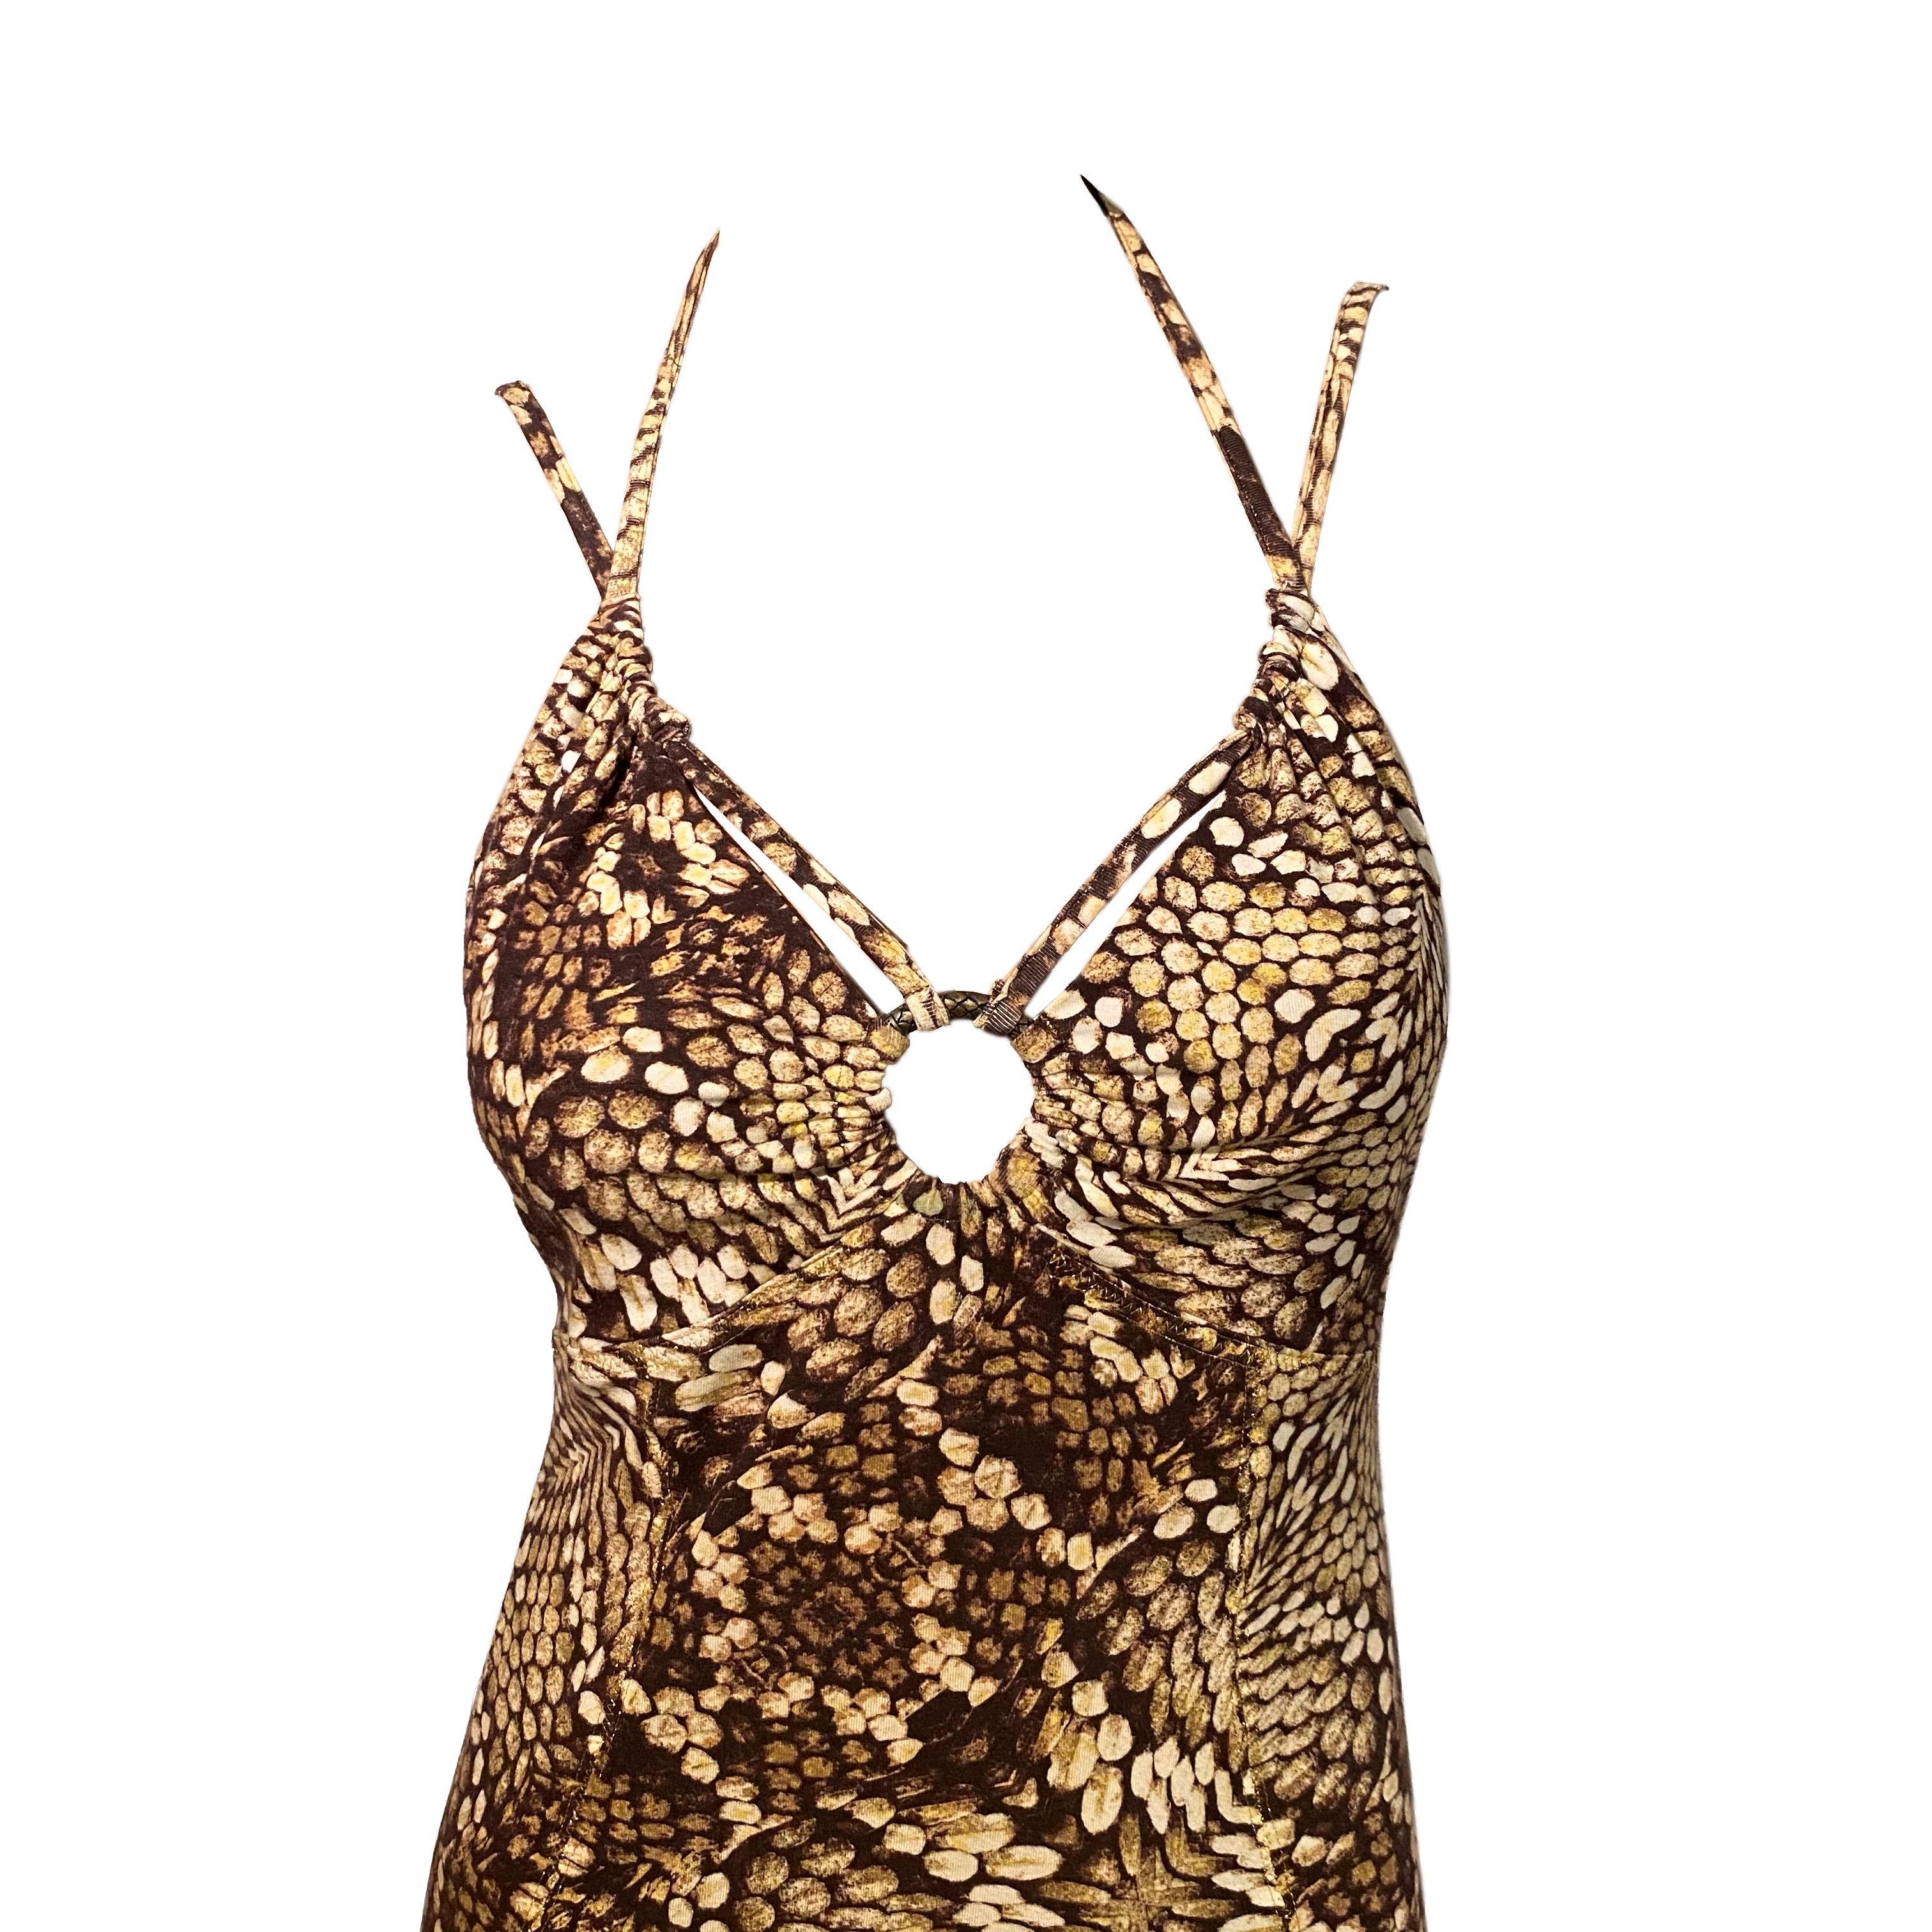 2000s Just Cavalli Snake Print Summer Dress with O-Ring. Multi Strap and low-back with flared bottom. 

100% Cotton, made in Italy

Size IT 38

Bust: 80 cm / 31.4 inches
Waist: 80 cm / 31.4 inches
Length (from pit): 68 cm / 26.7 inch